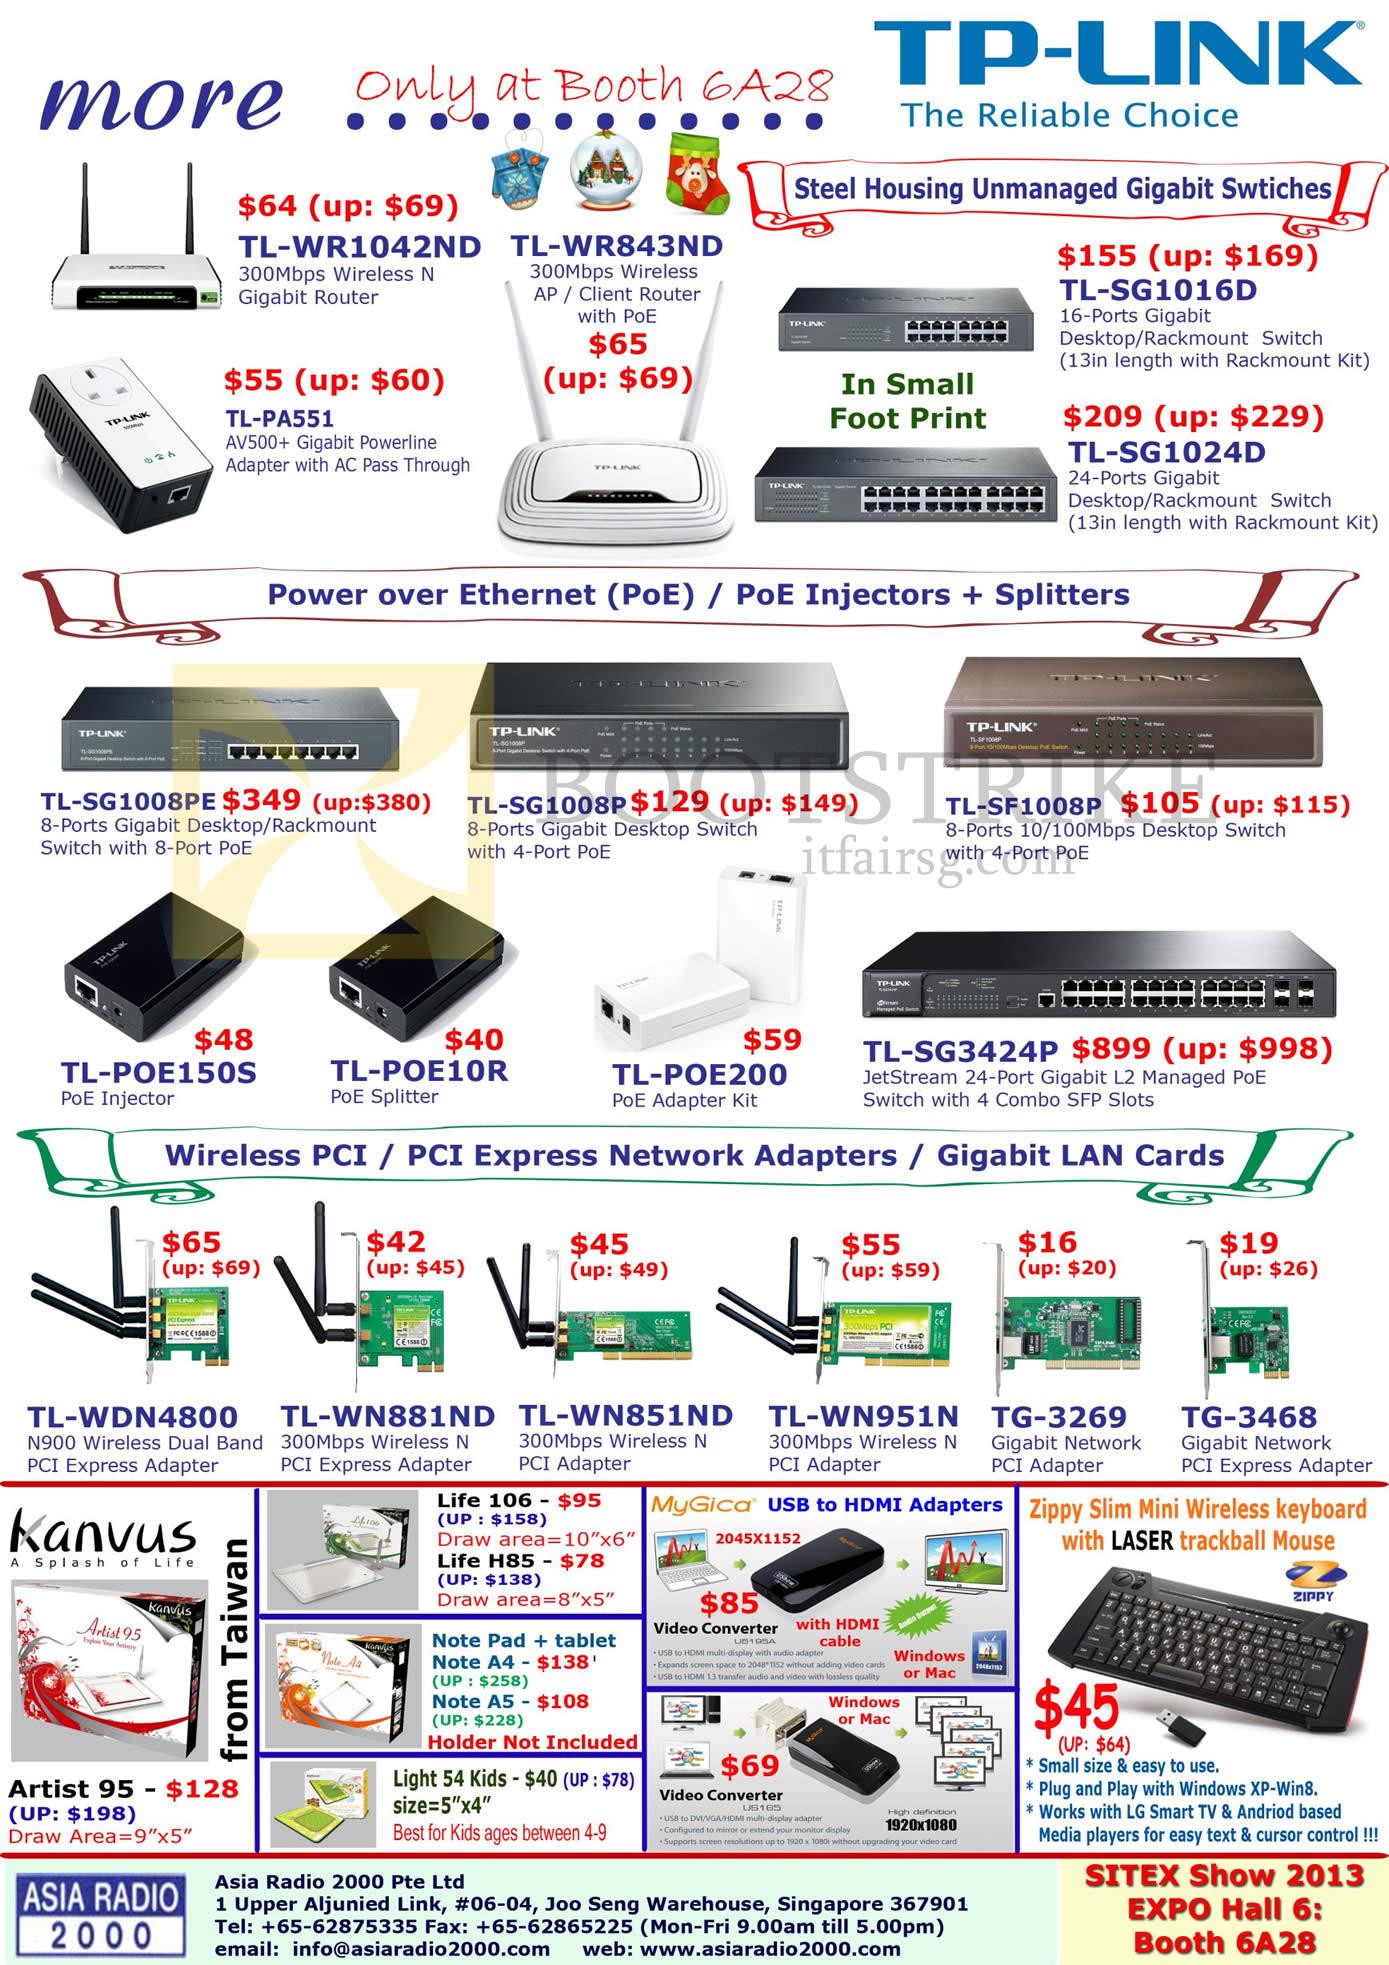 SITEX 2013 price list image brochure of Asia Radio TP-Link Networking Wireless Routers, Switch, Power Over Ethernet PoE, USB Adapters, PCI, Kanvus, MyGica, Keyboard, Life 106